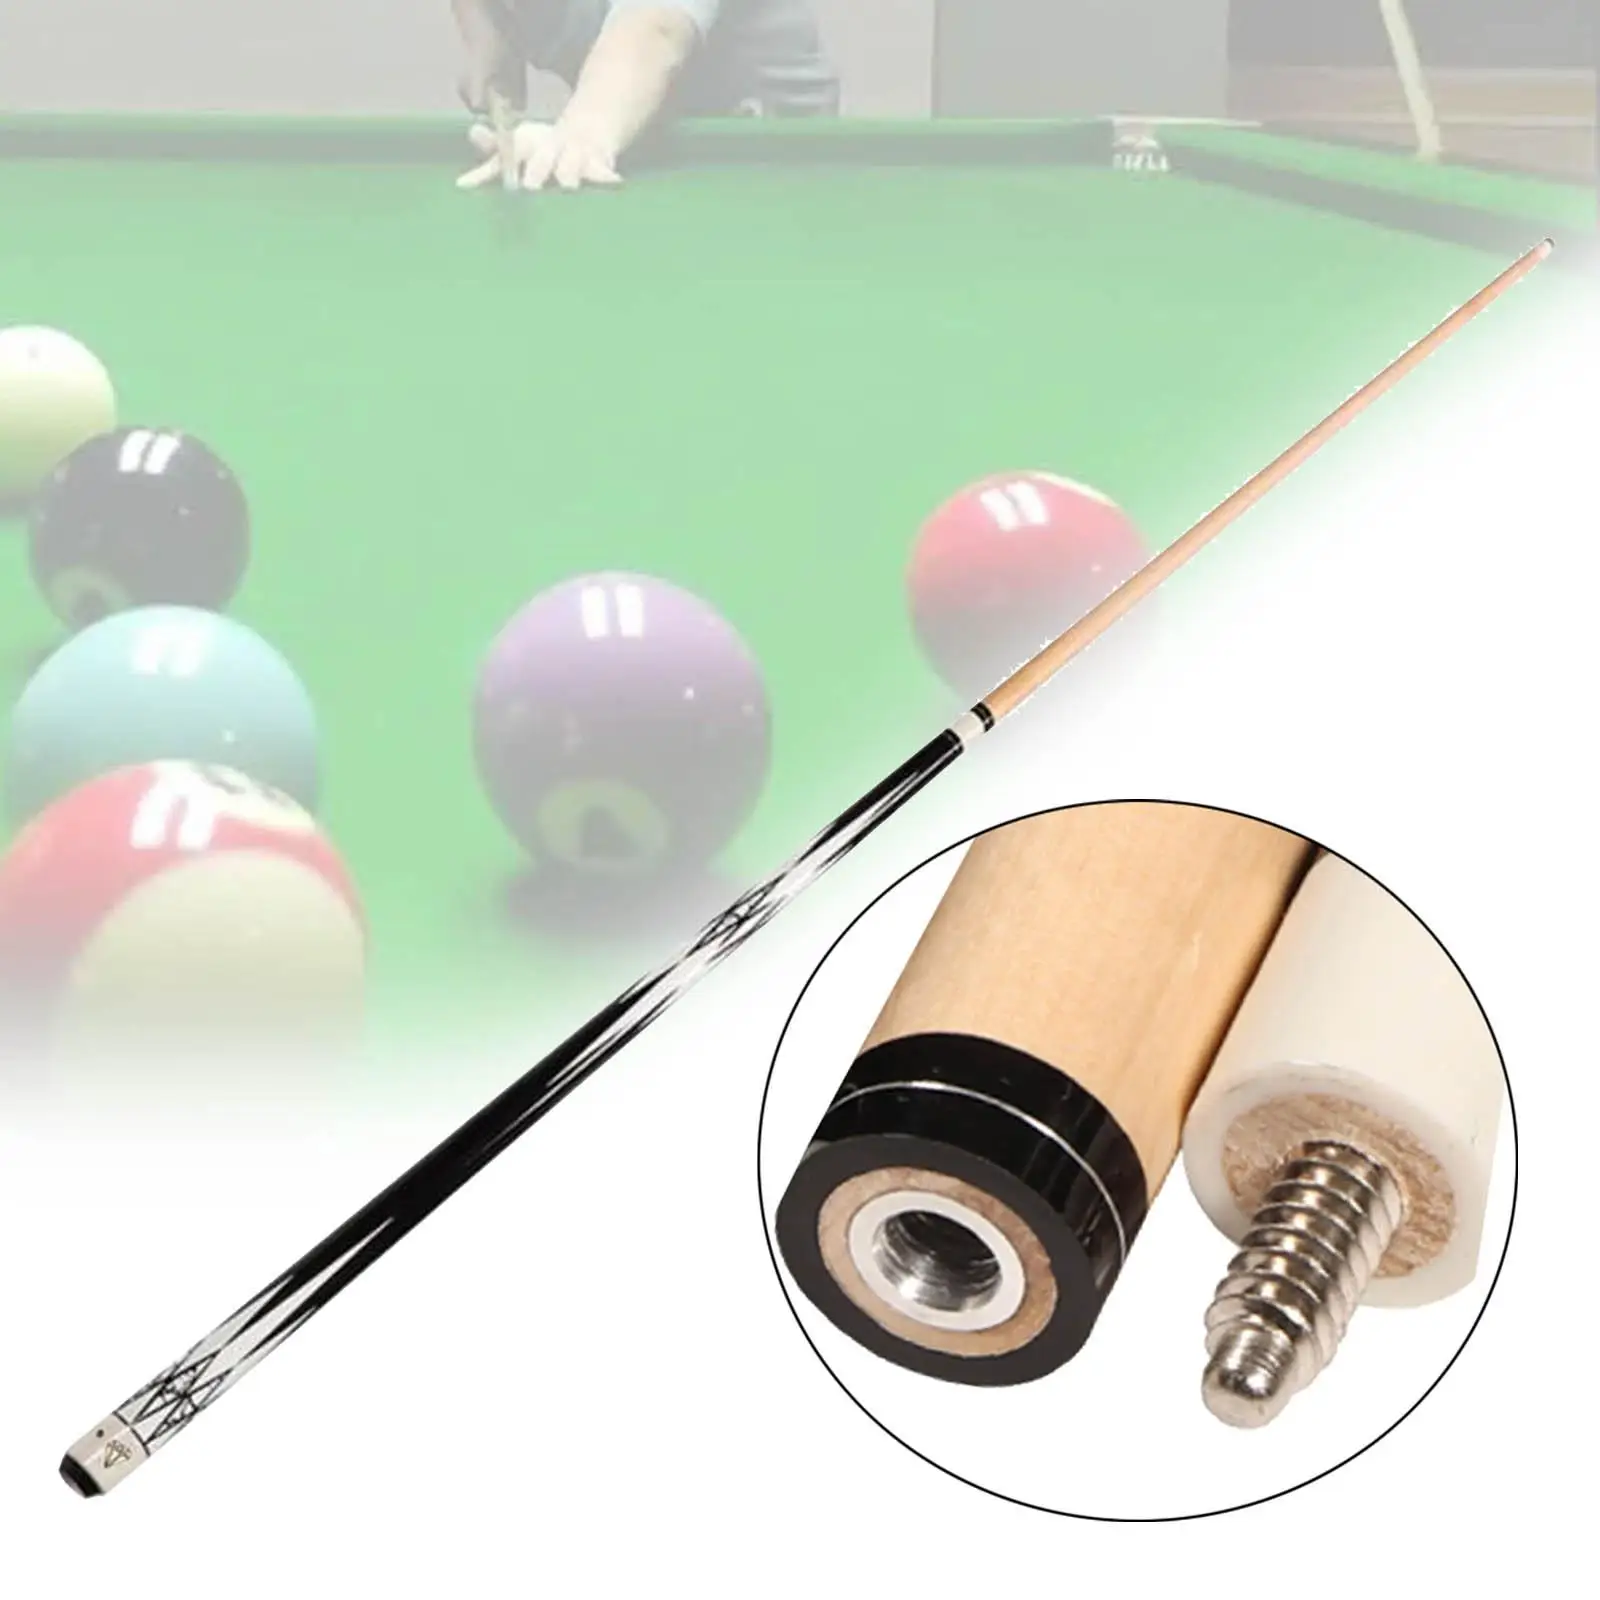 Pool Cue Professional Wooden White Ferrule with Carrying Bag 145cm Snooker Cue for Adult Man Cave Gift Unisex Billiard Players